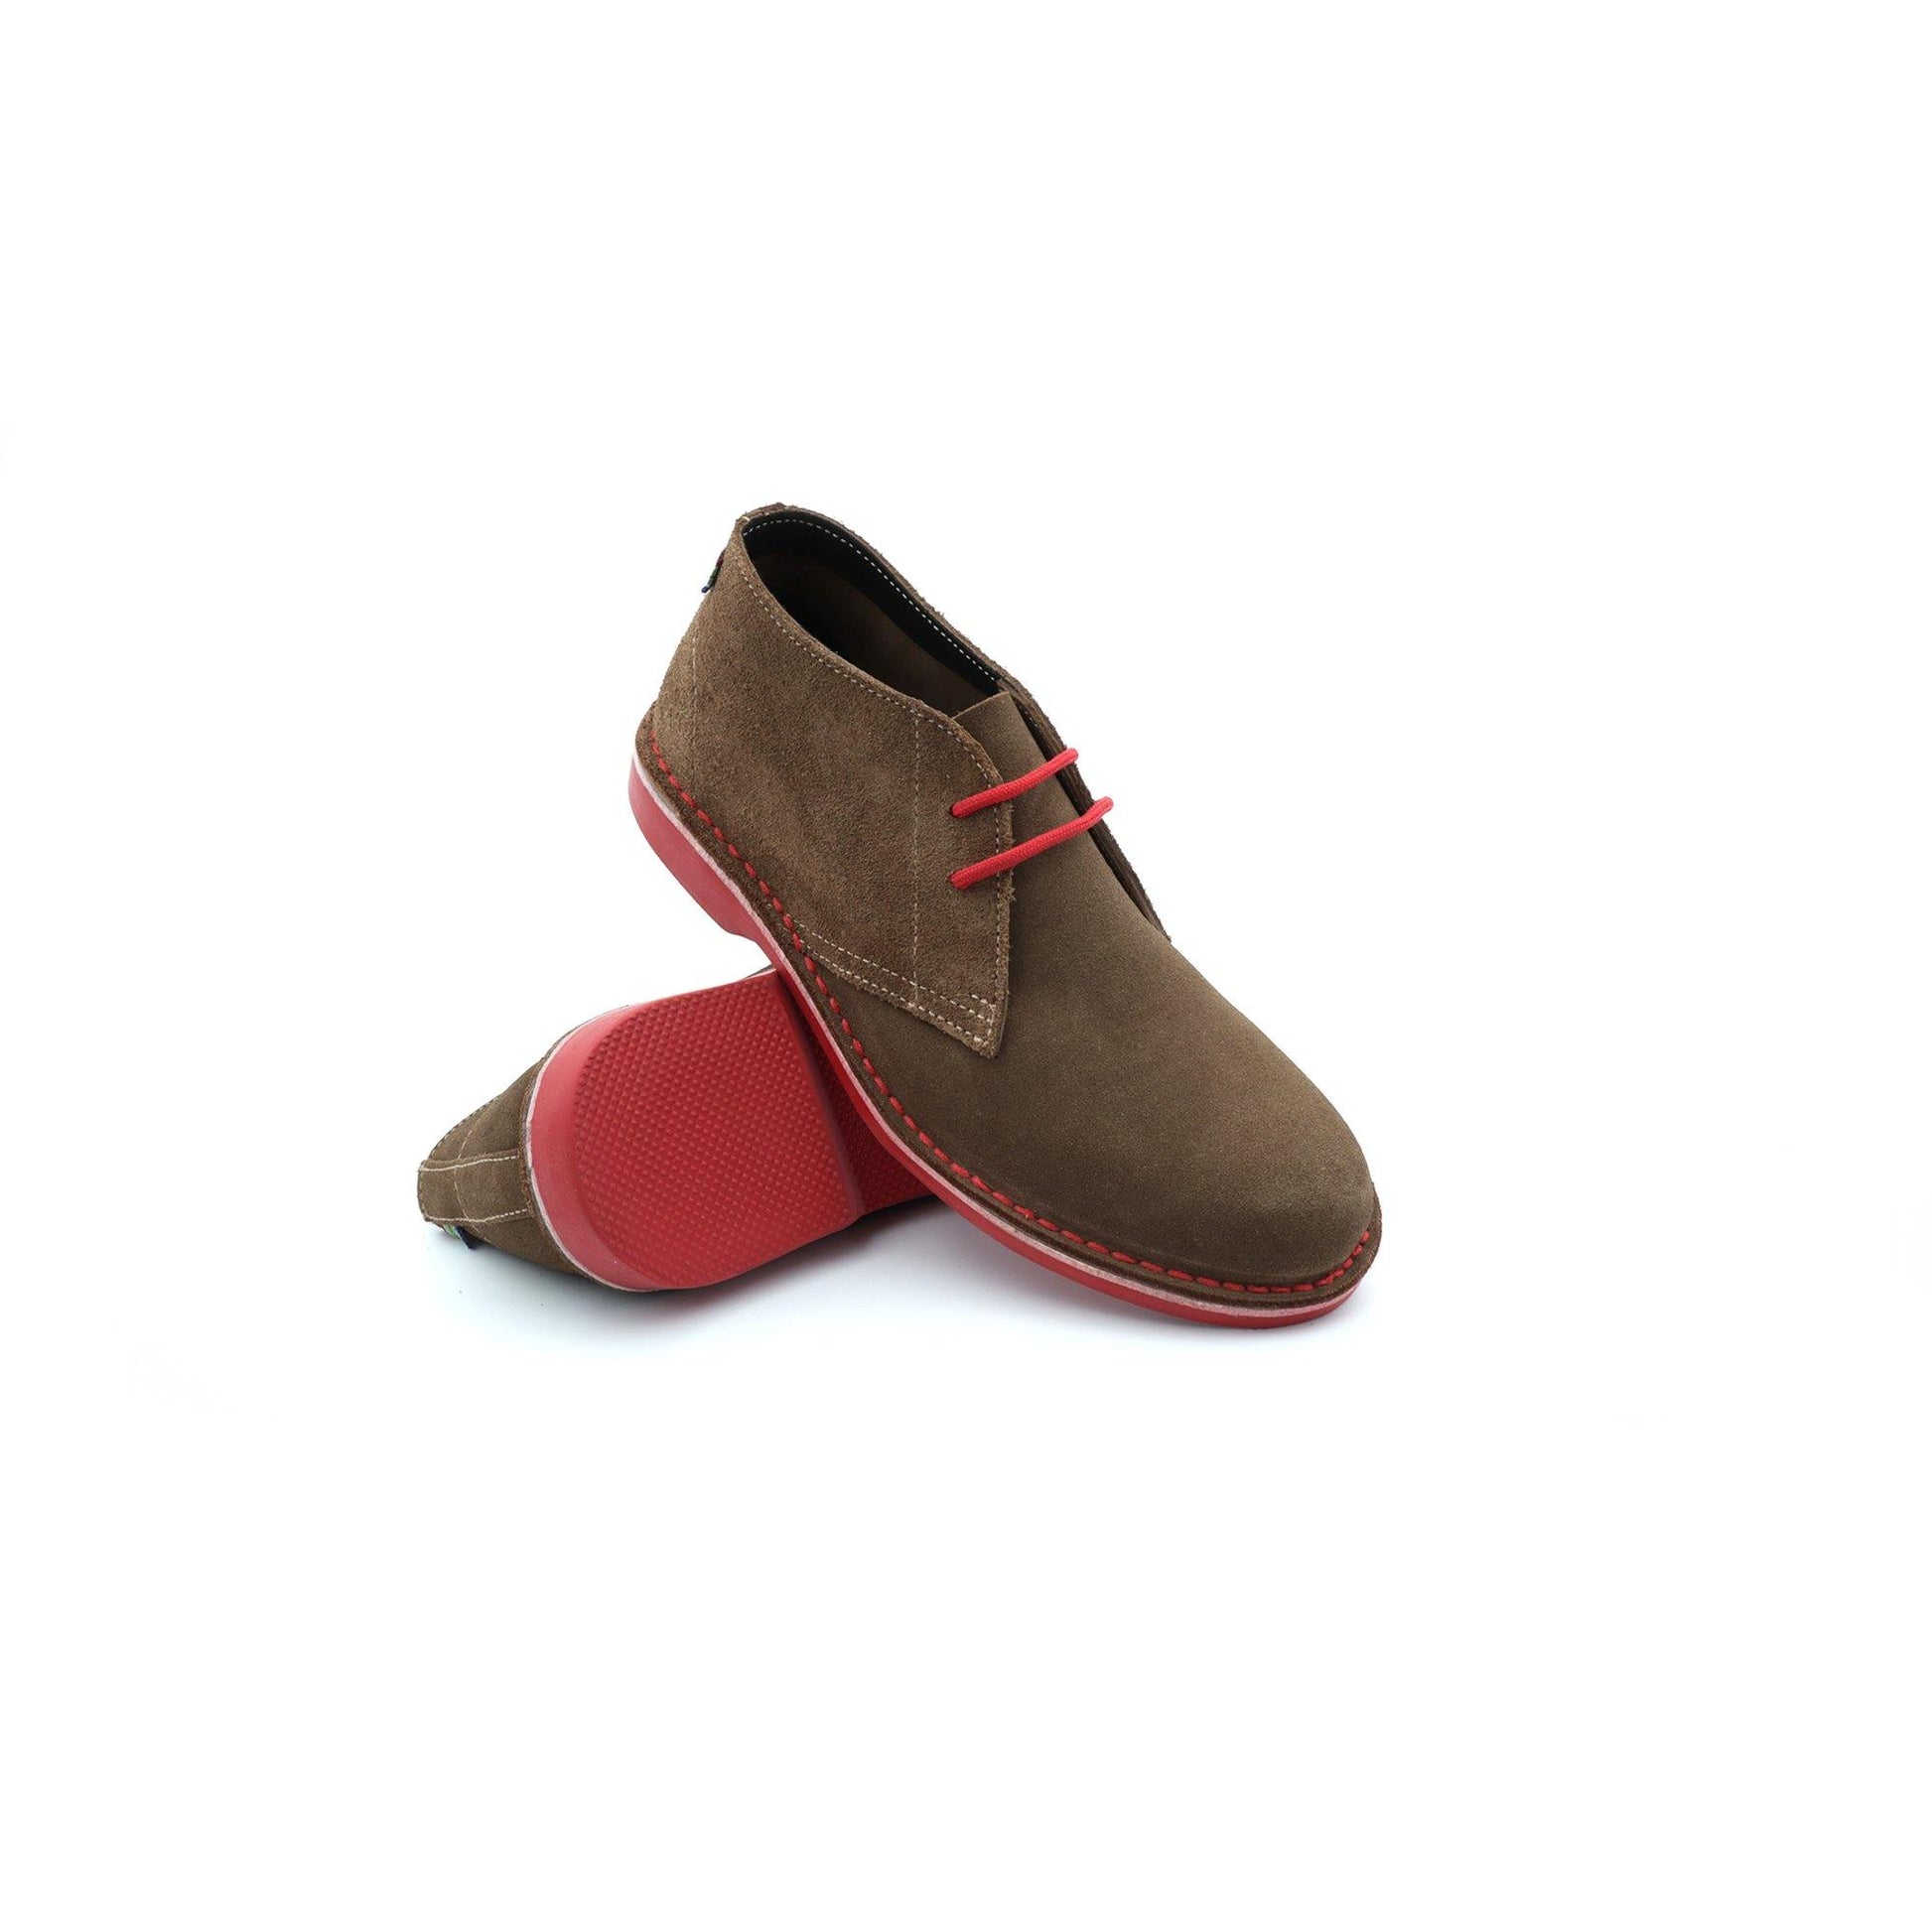 Lace Up Desert Boot - Red - stok.